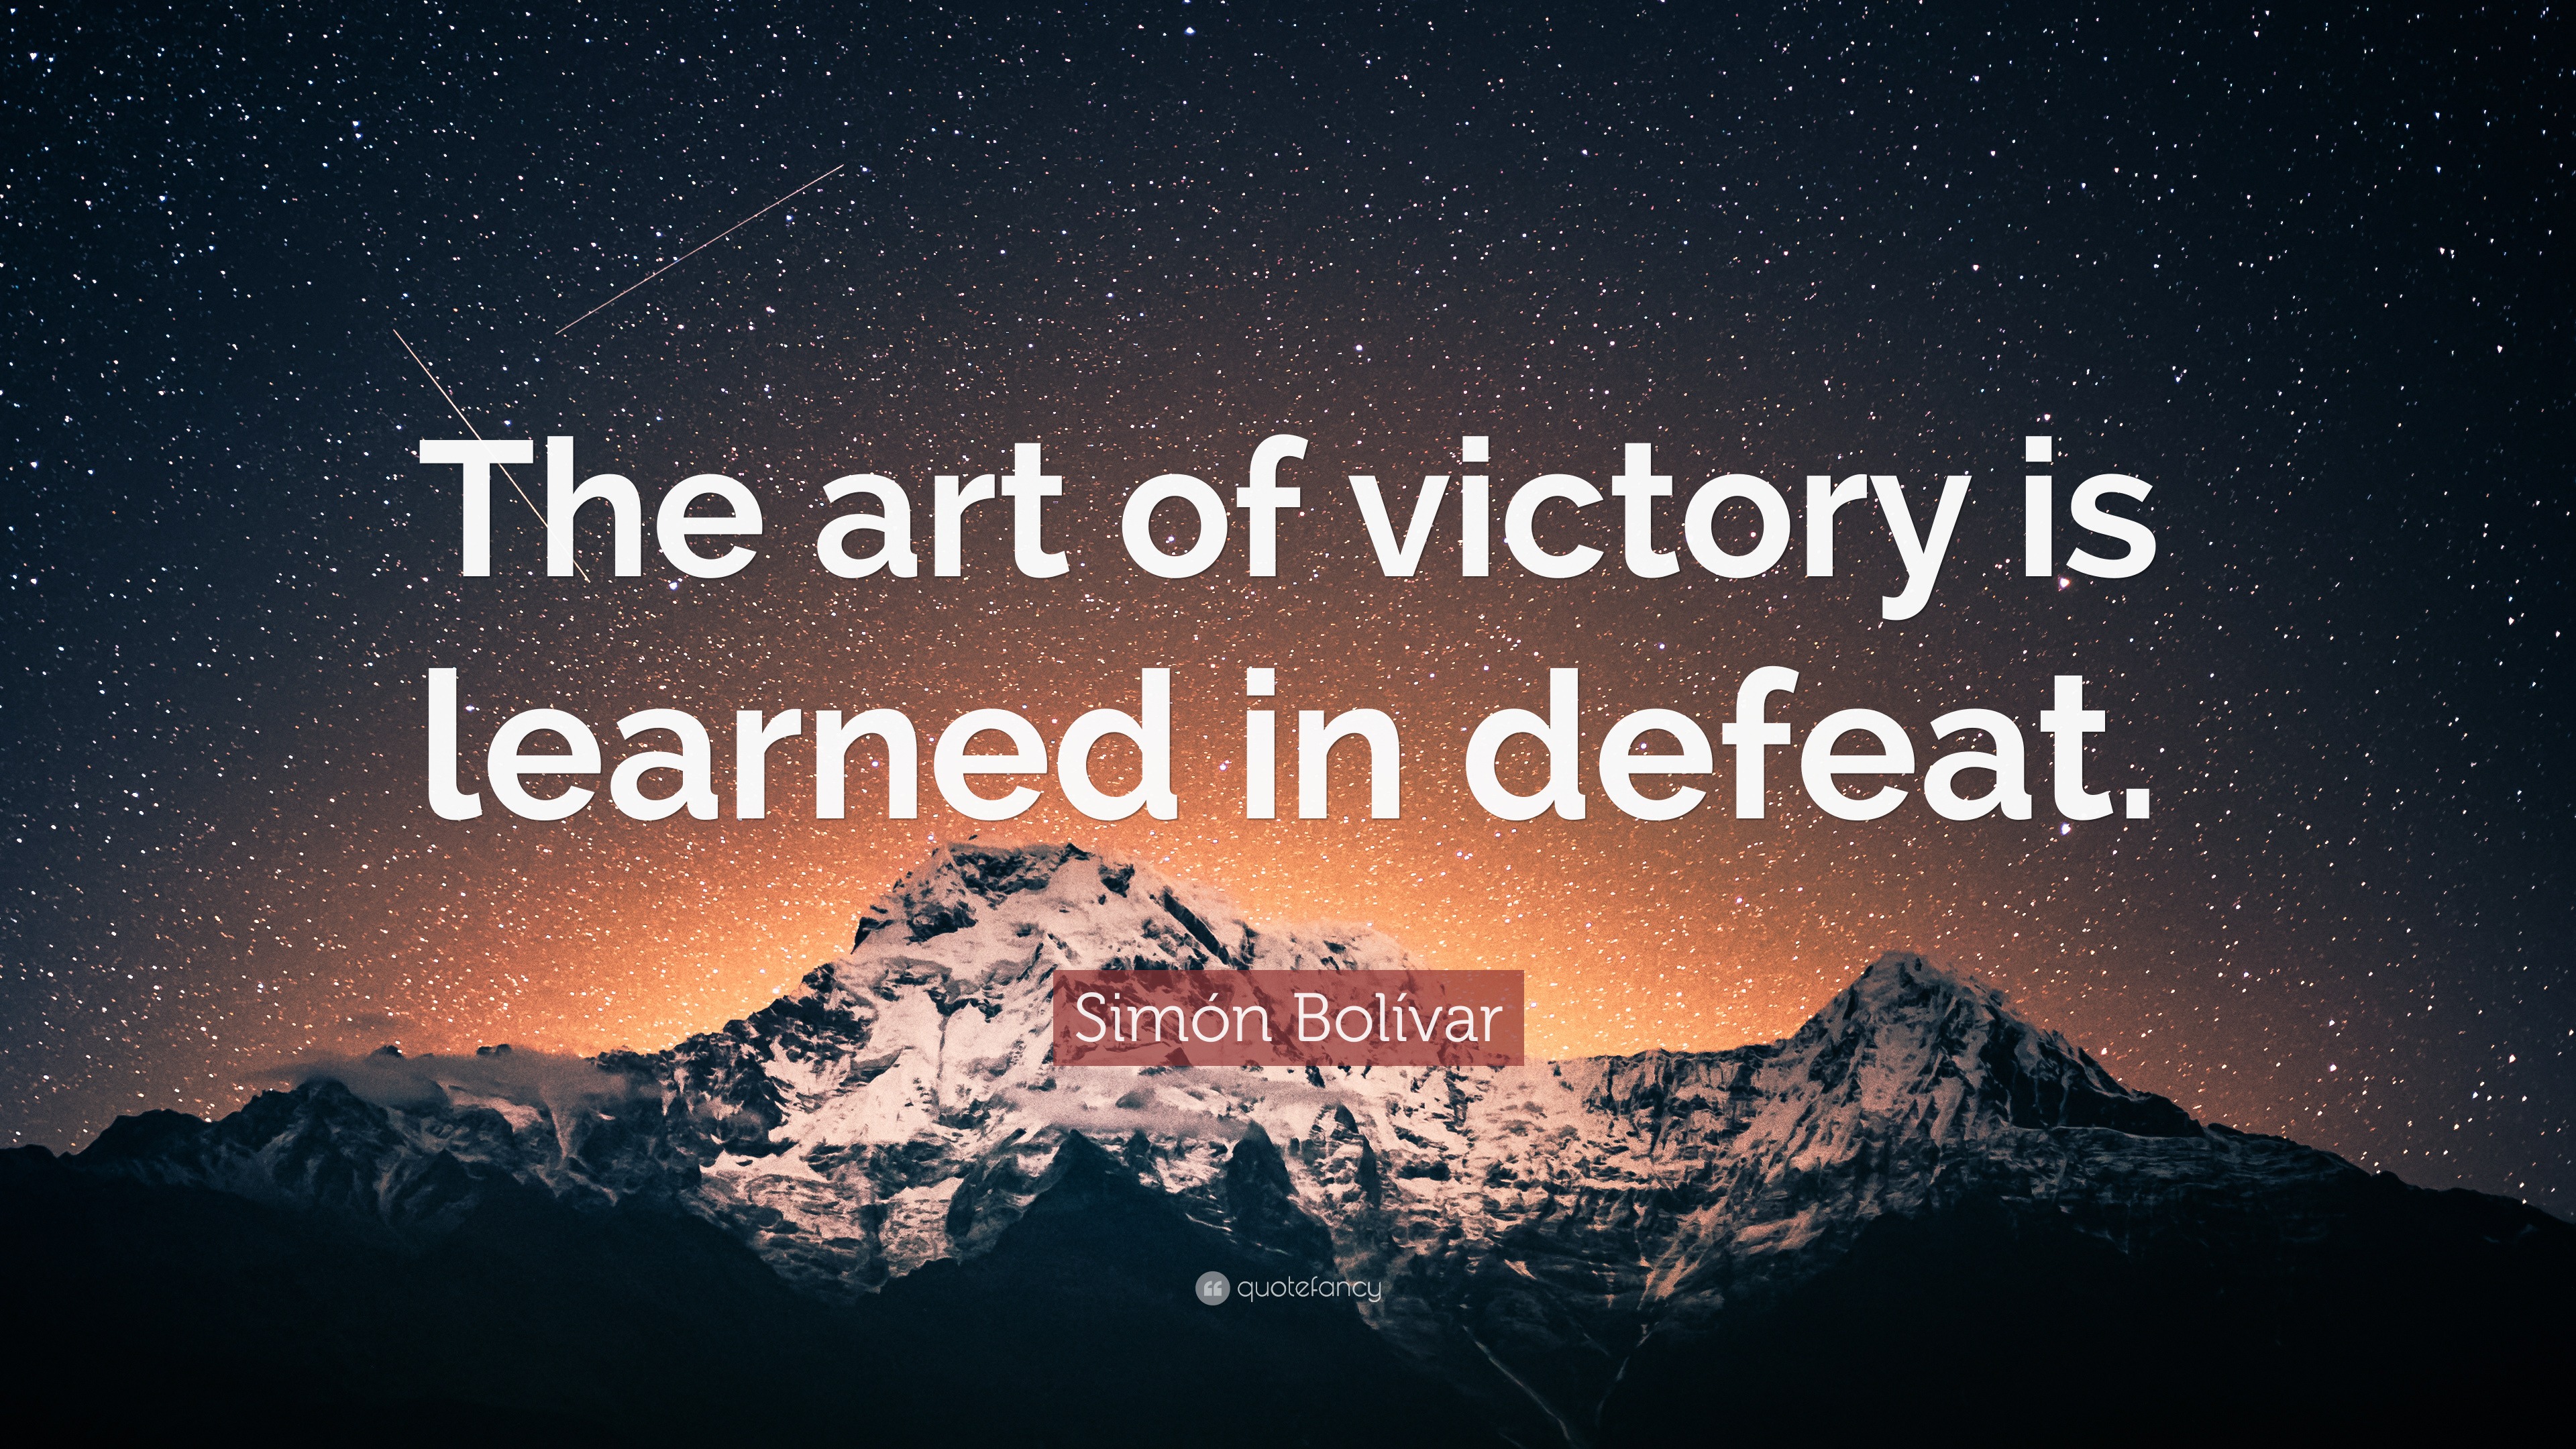 Simón Bolívar Quote: "The art of victory is learned in defeat." (9 wallpapers) - Quotefancy